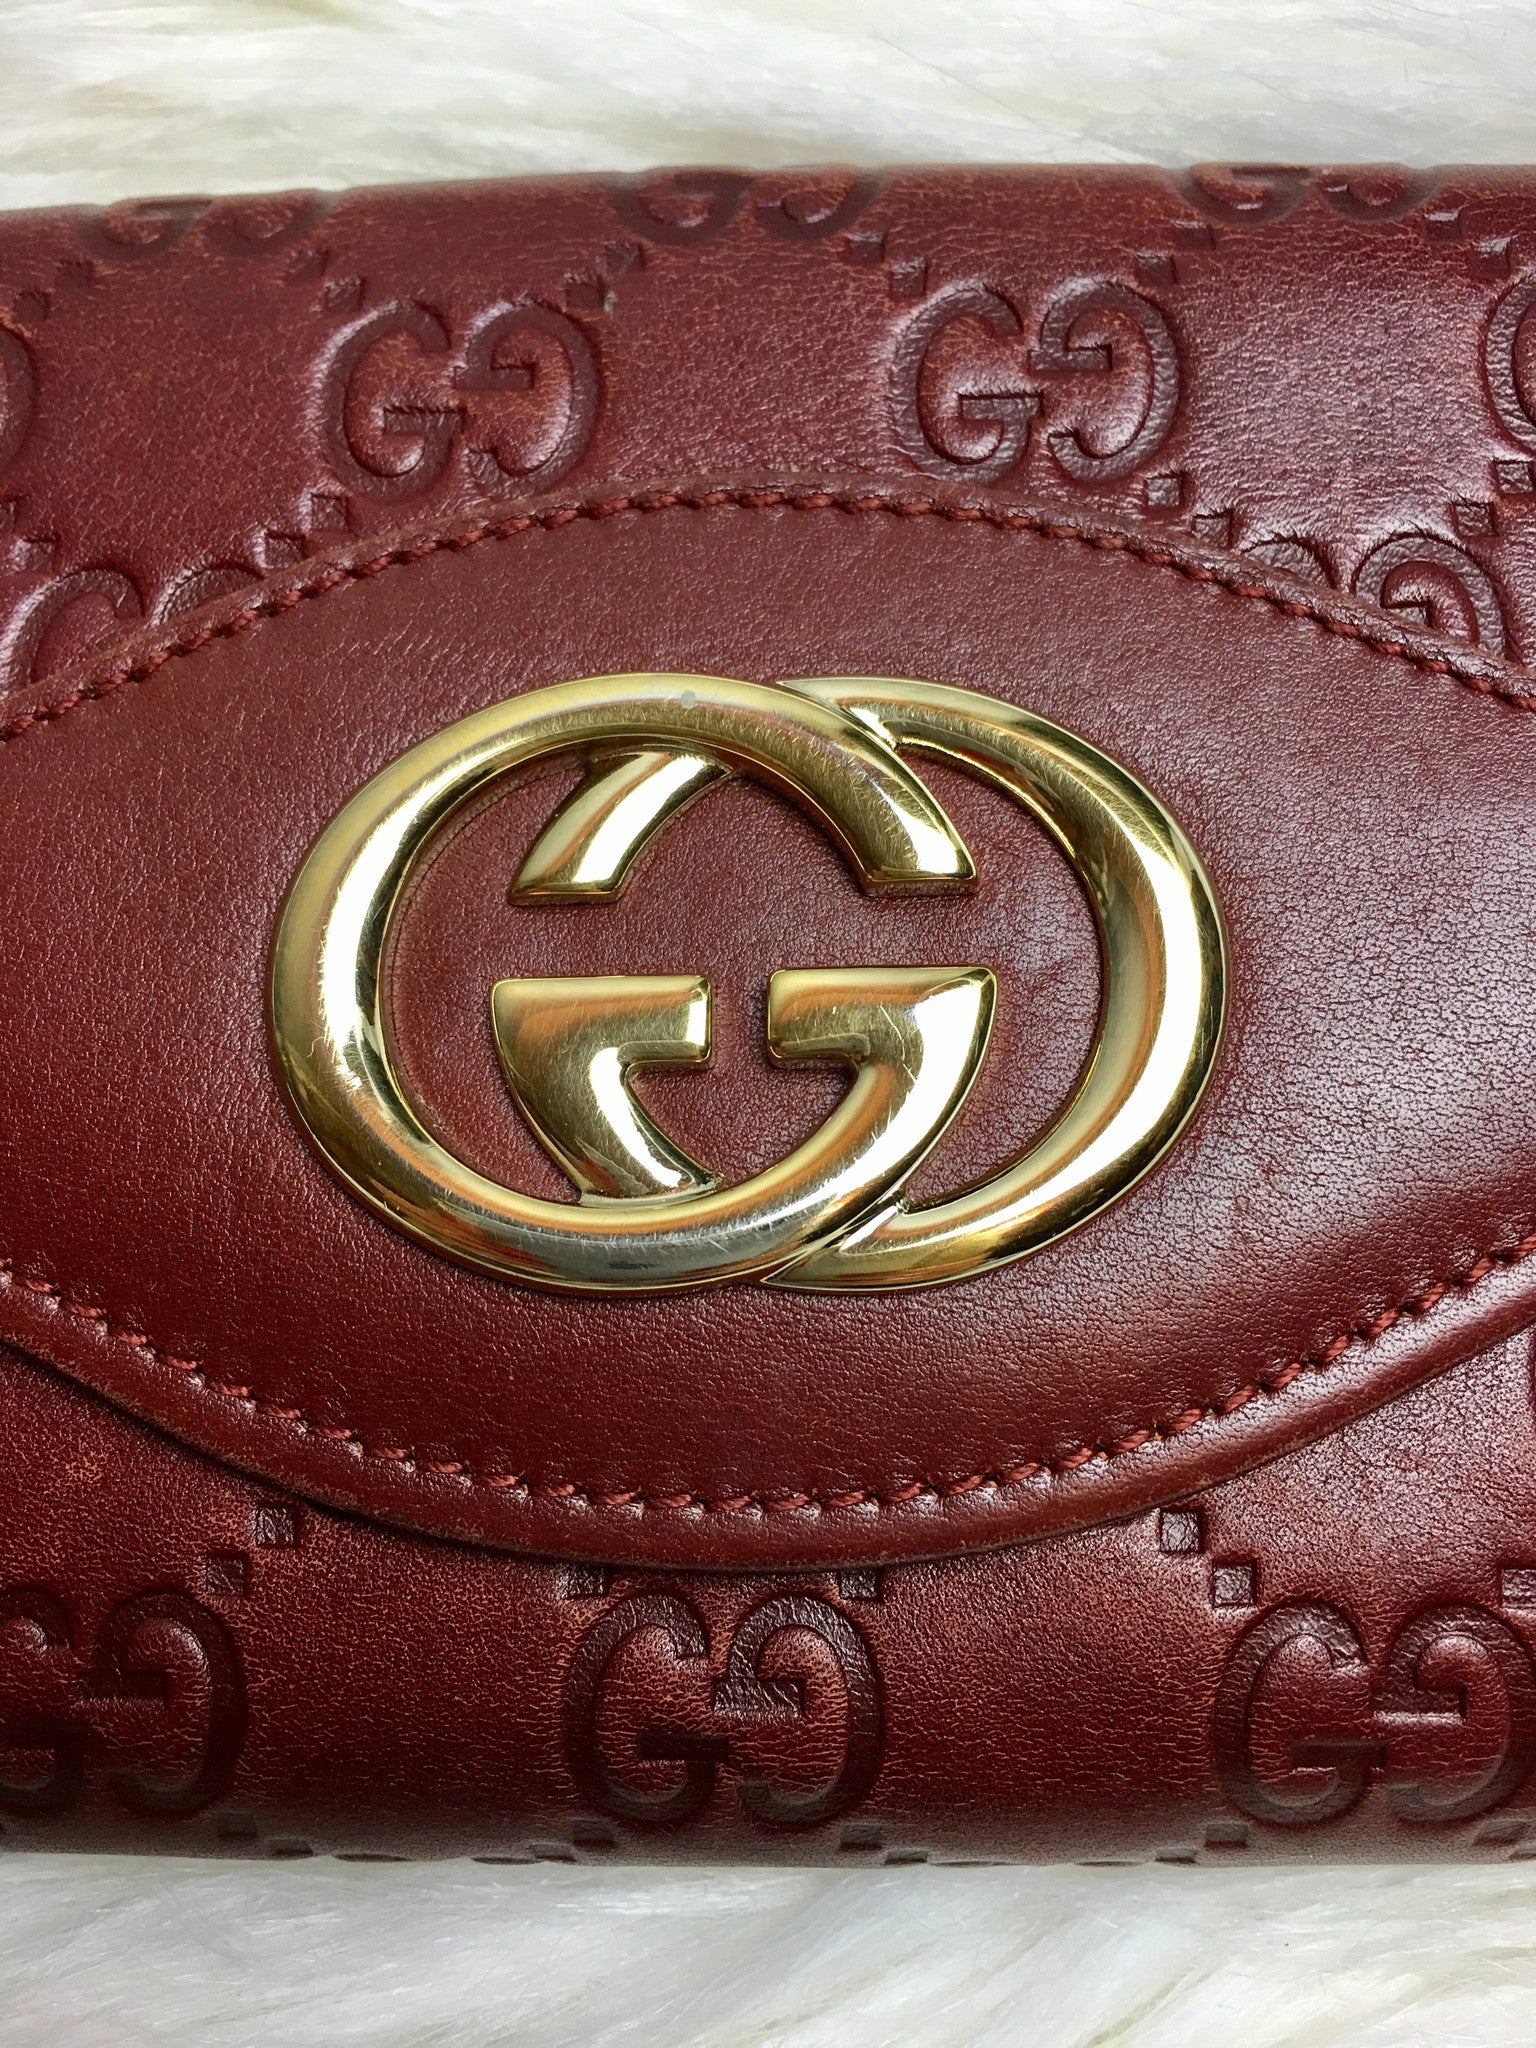 GUCCI Guccissima Embossed Wallet